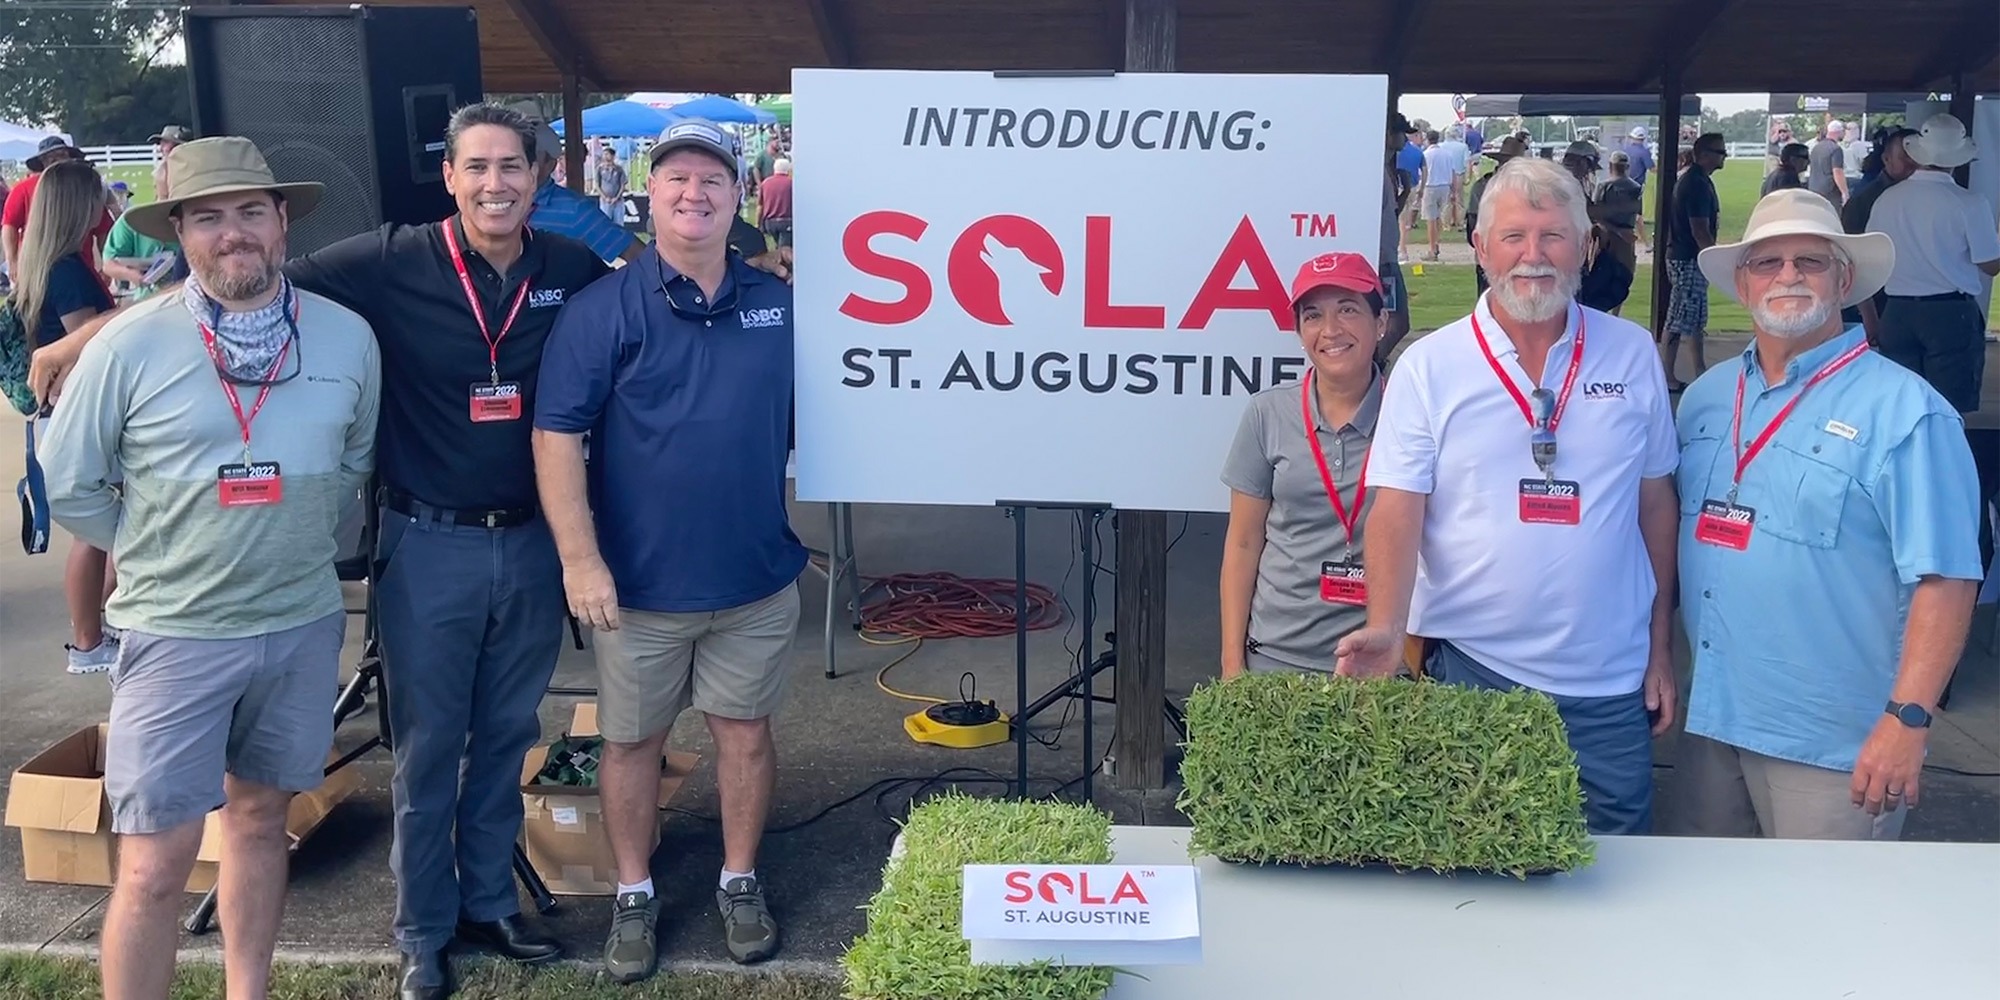 NC State University Releases Sola™, the Newest St. Augustinegrass